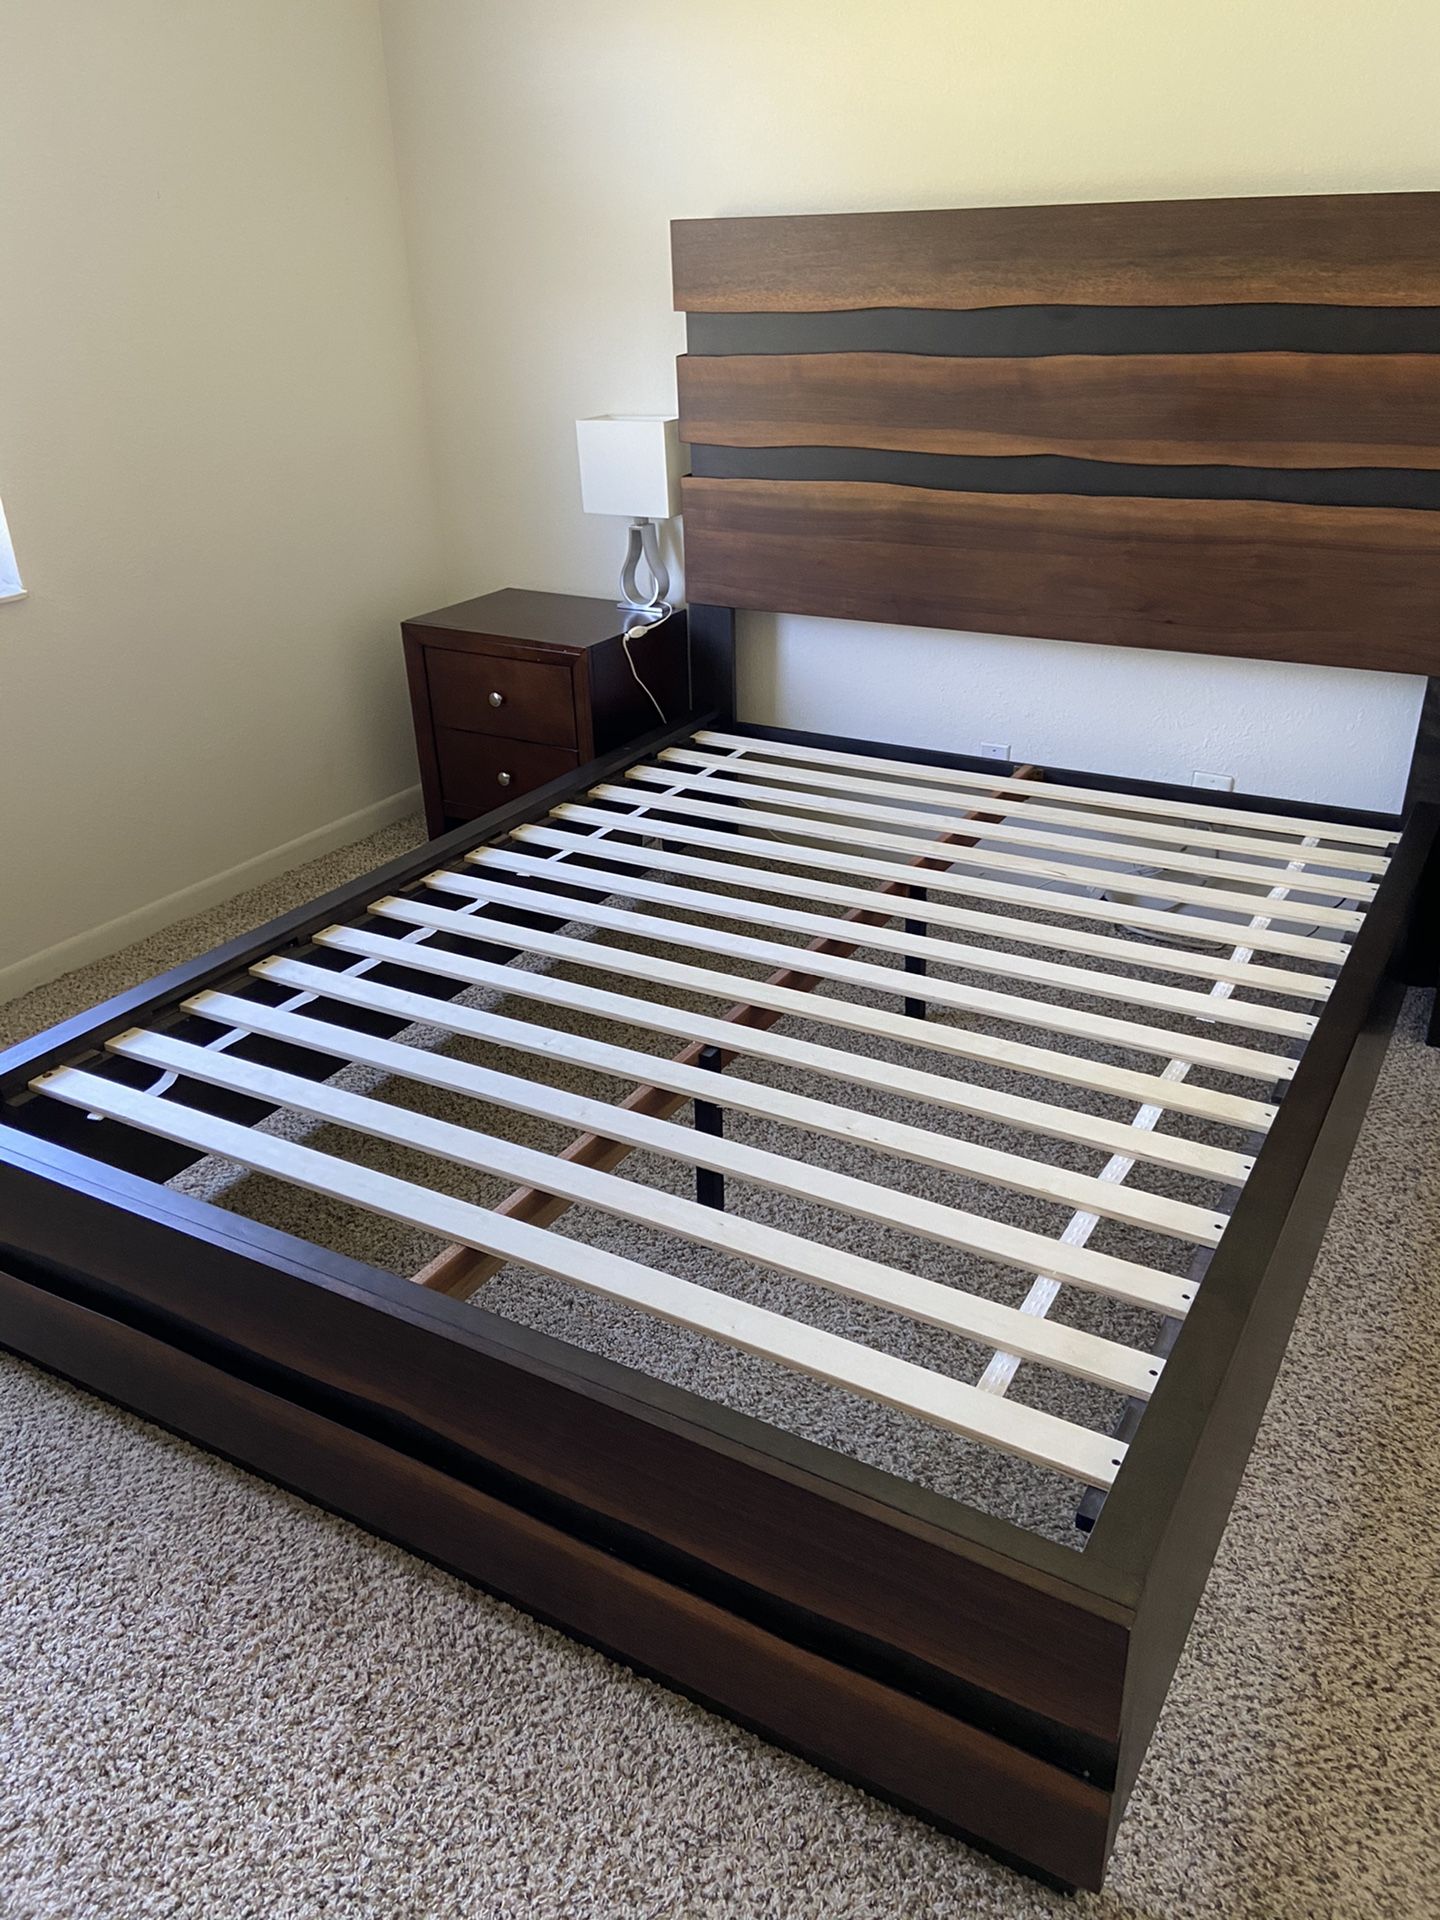 Queen bed frame, coffee brown